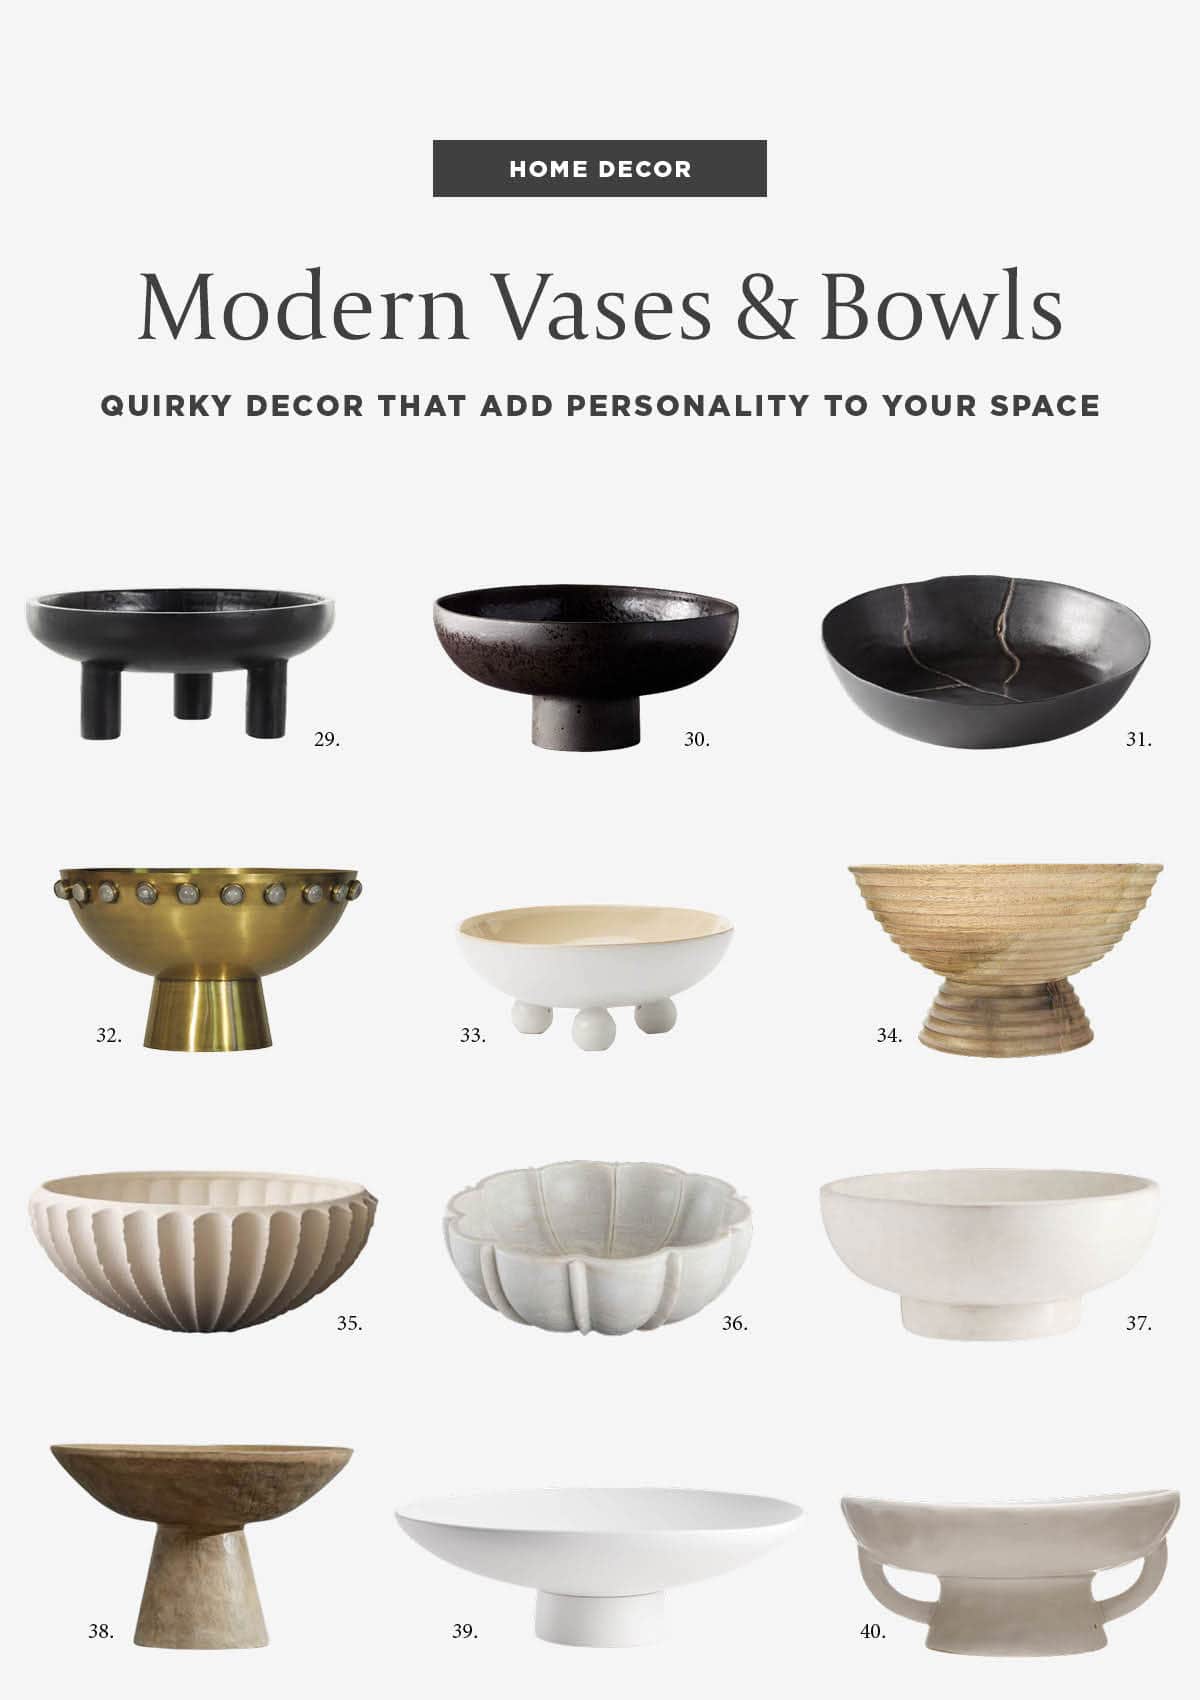 The New Classics: Timeless and Unique Footed Bowls for Your Home - Looking for something out of the ordinary? Check out these unique modern black vases that add a touch of artistry and elegance to your home decor.